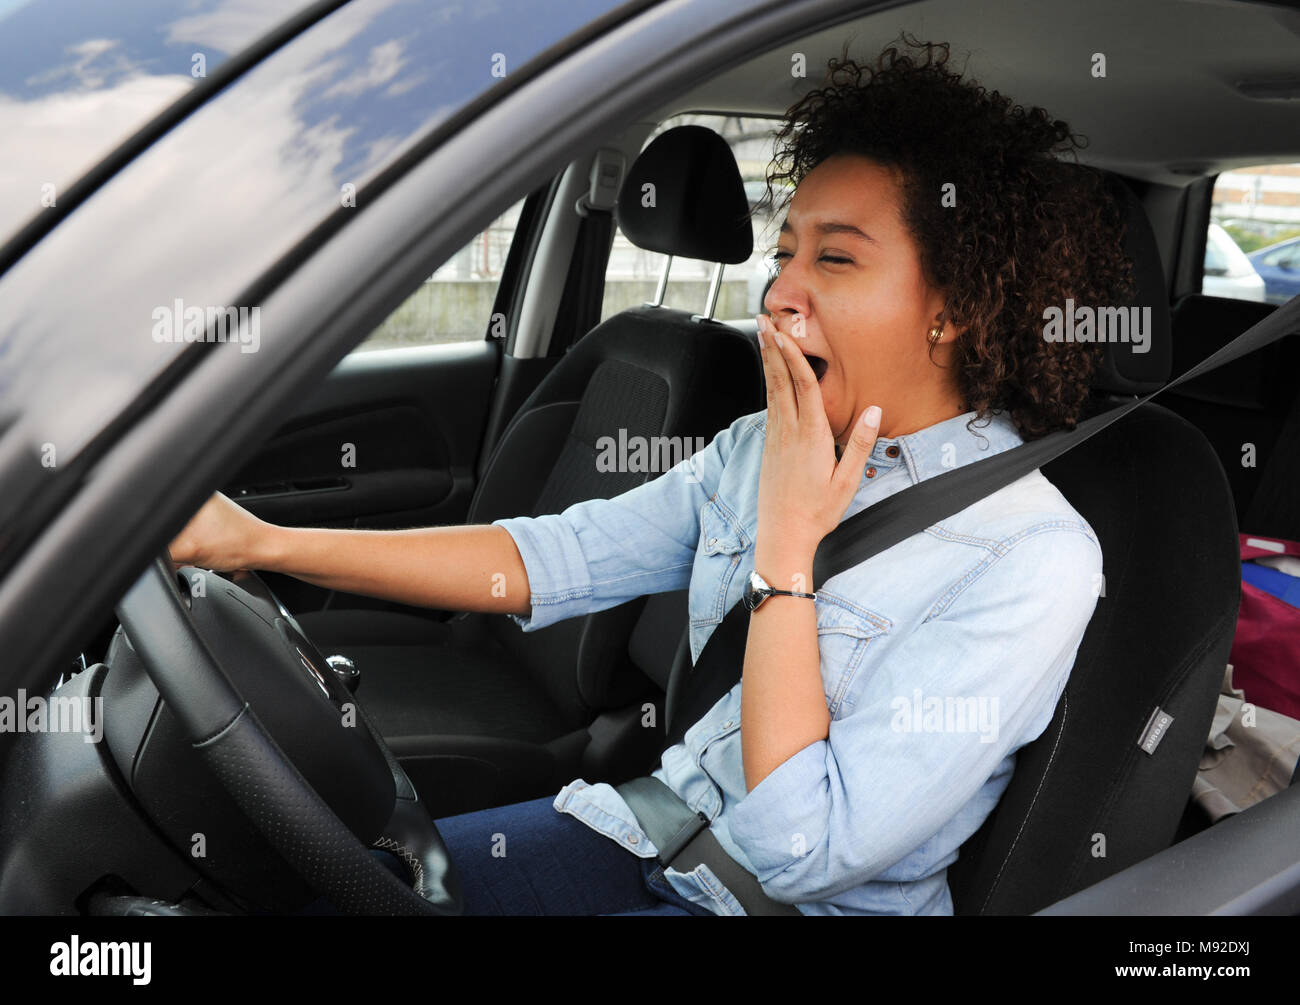 Portrait sleepy tired fatigued exhausted young attractive woman driving her car Stock Photo